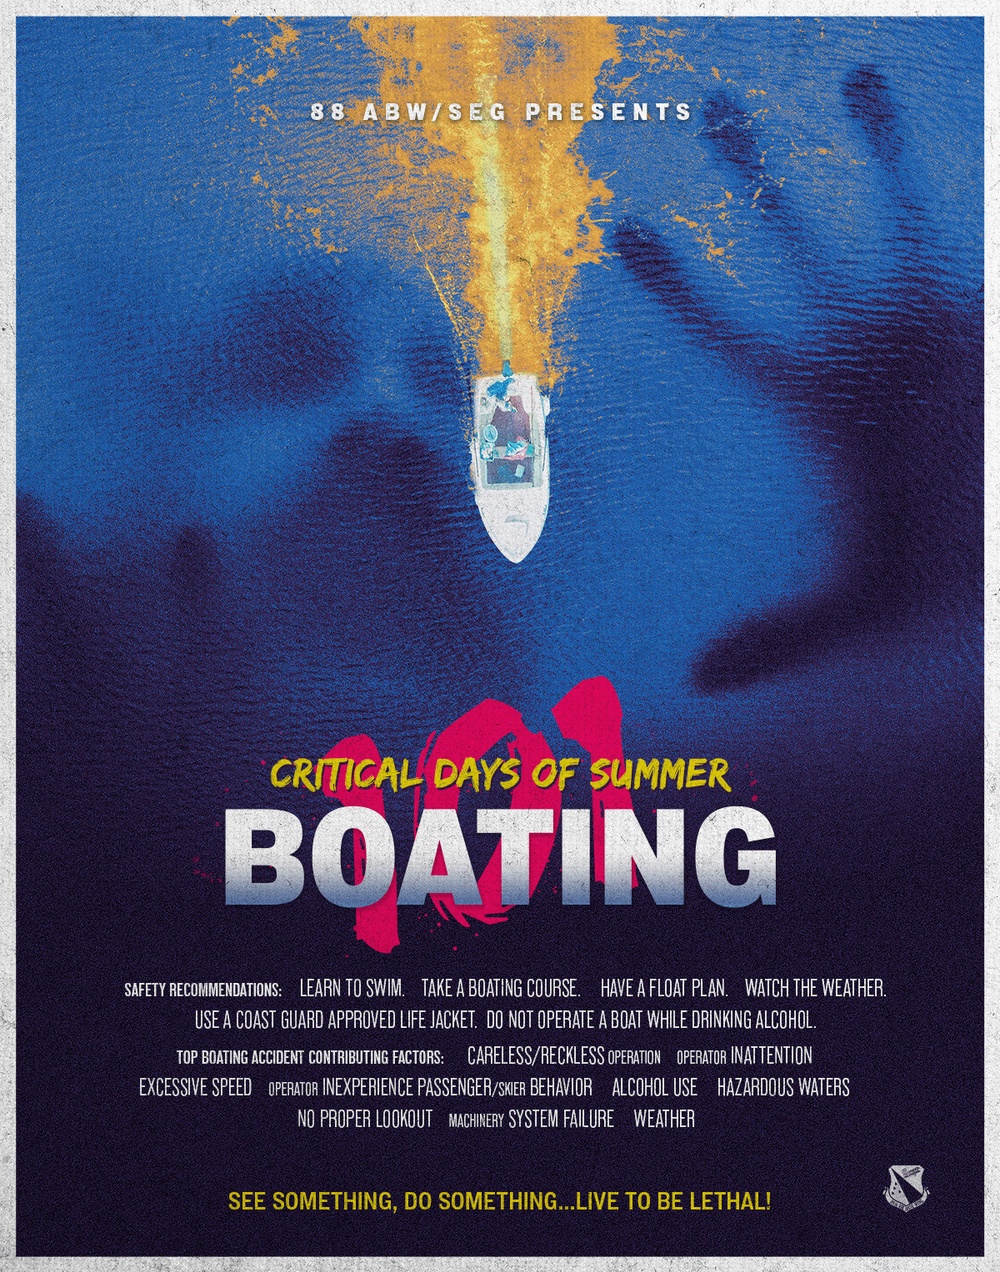 88ABW/SEG presents: 101 Critical Days of Summer - Boating